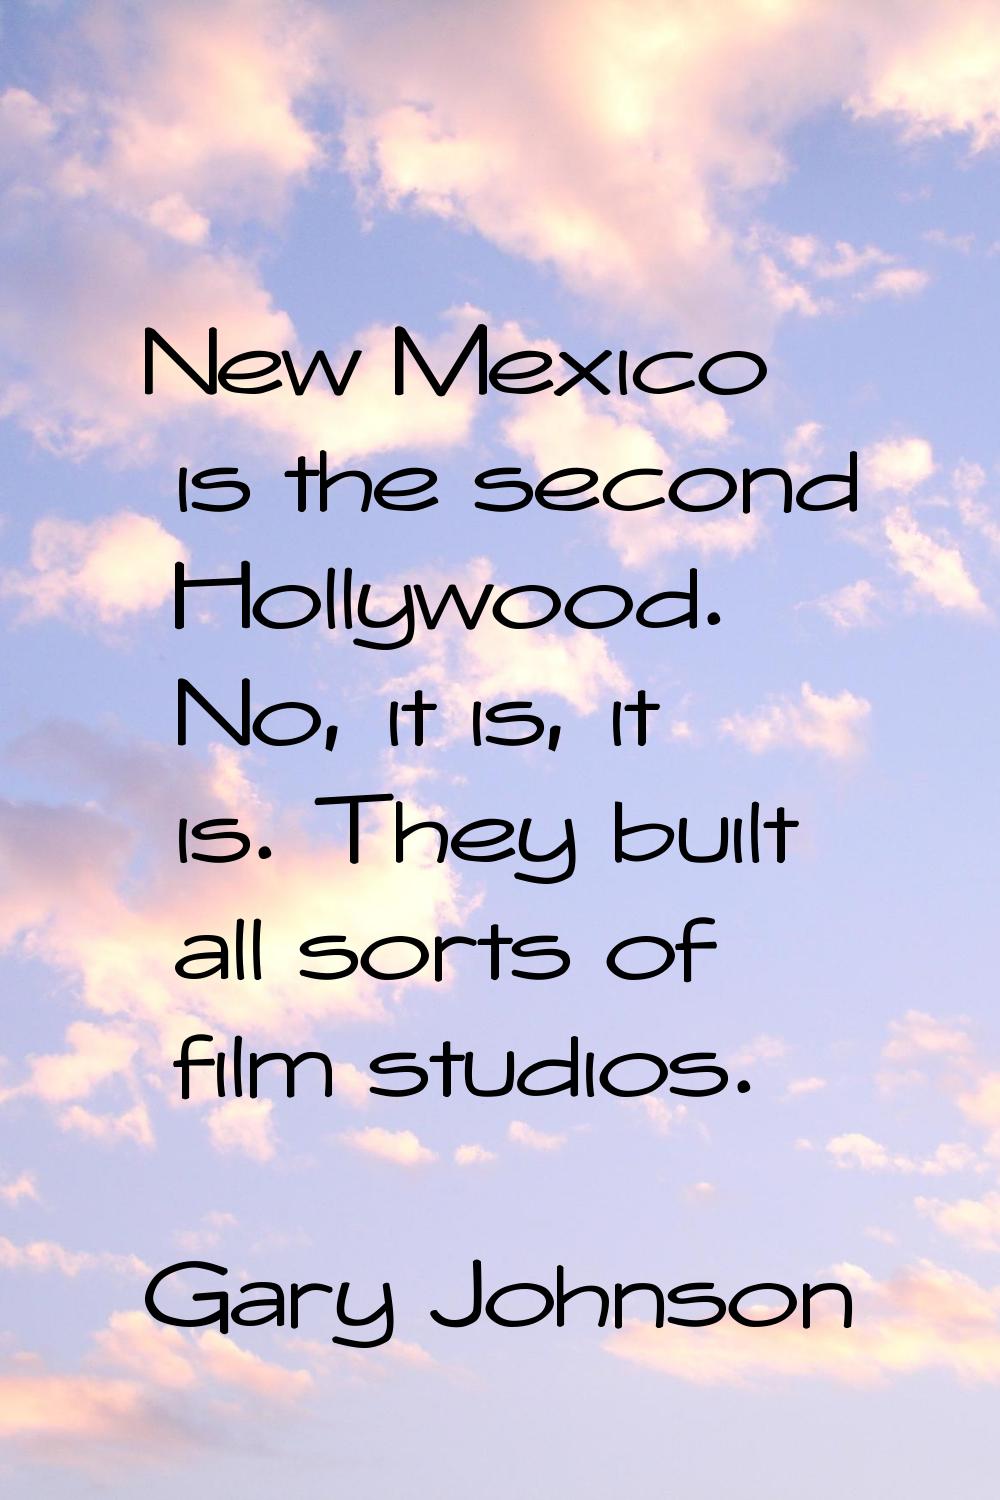 New Mexico is the second Hollywood. No, it is, it is. They built all sorts of film studios.